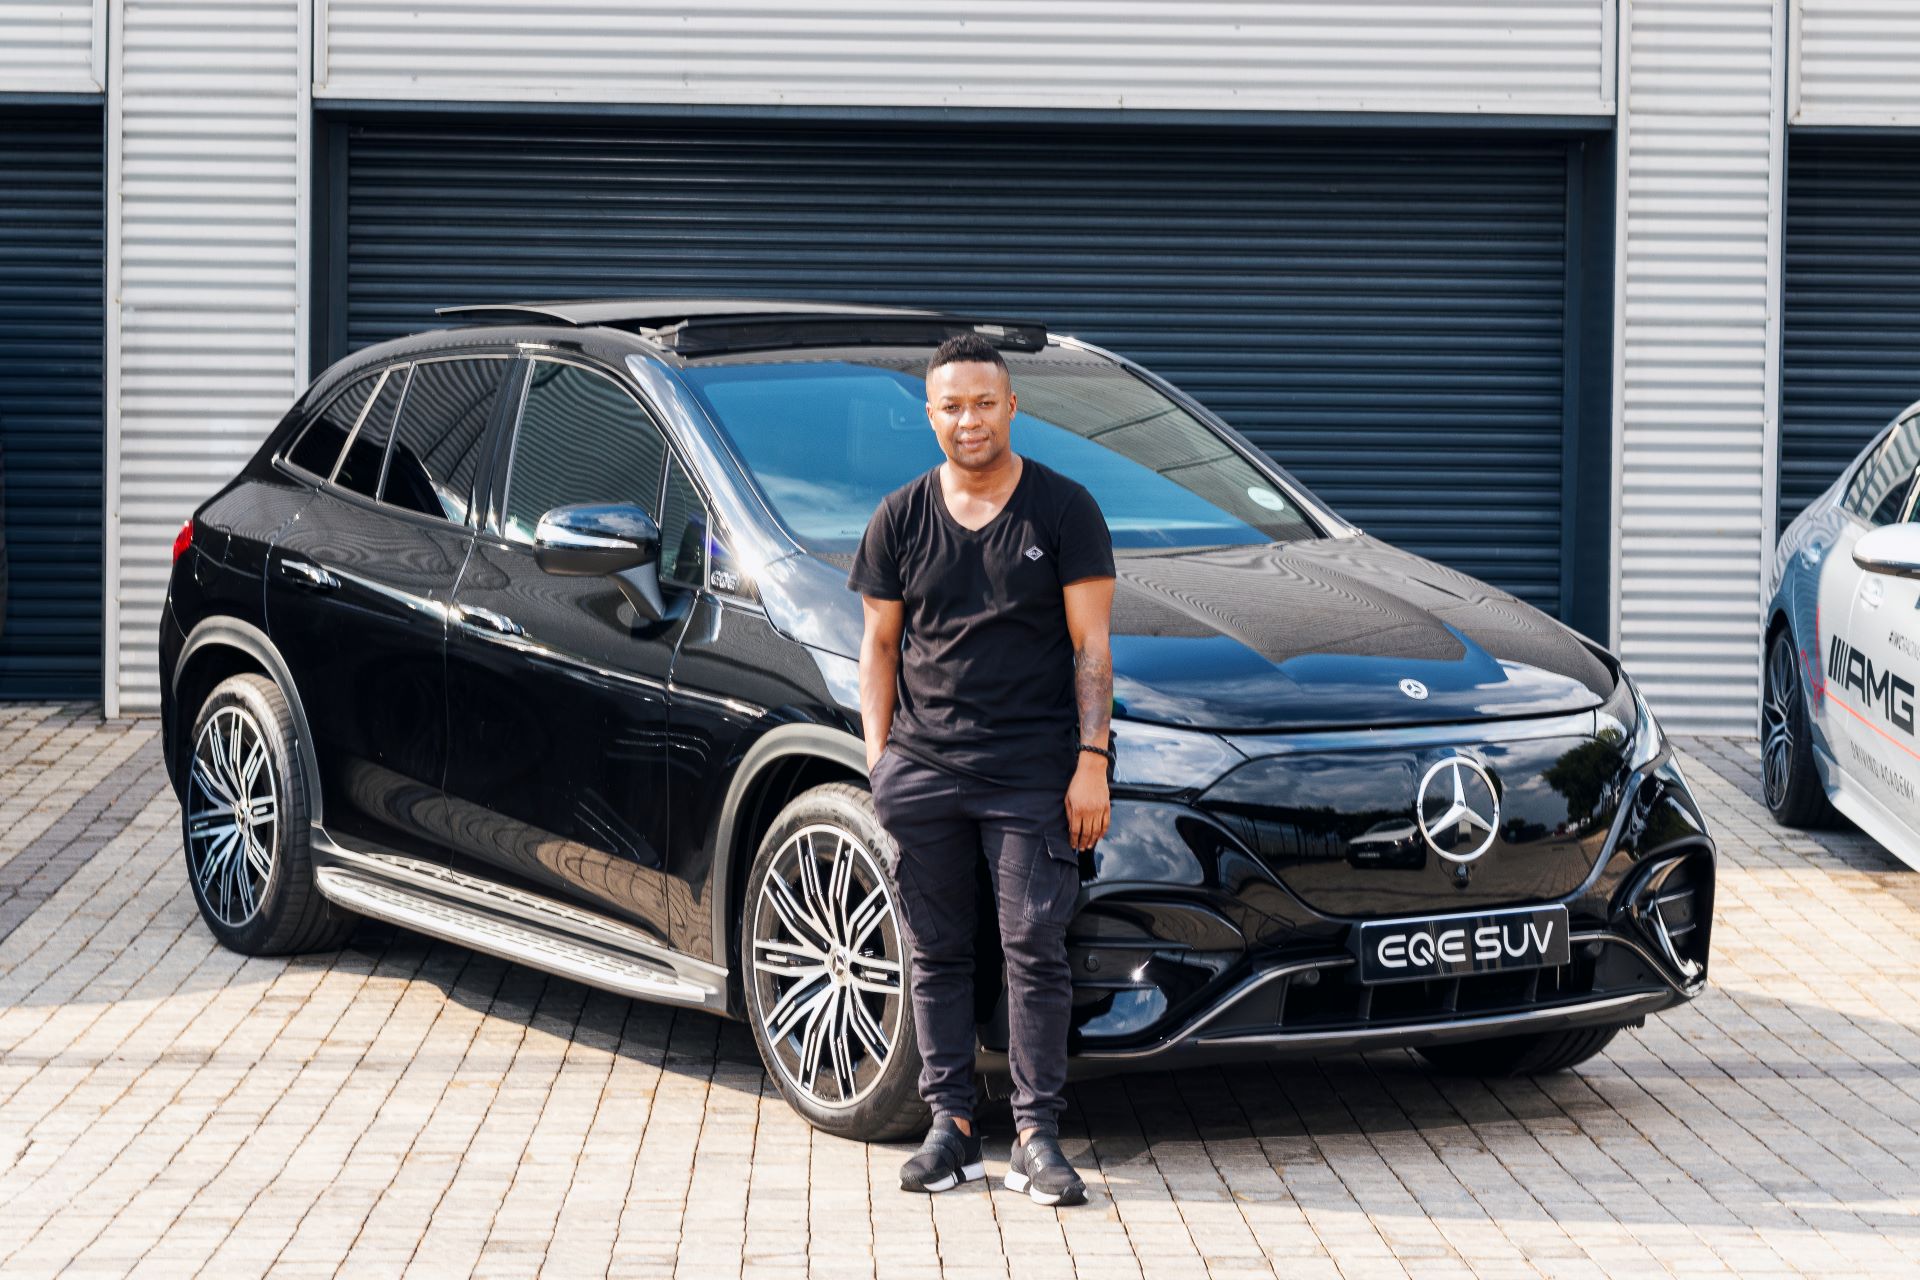 Mercedes-Benz South Africa Welcomes Chef Wandile Mabaso as a Friend of the brand